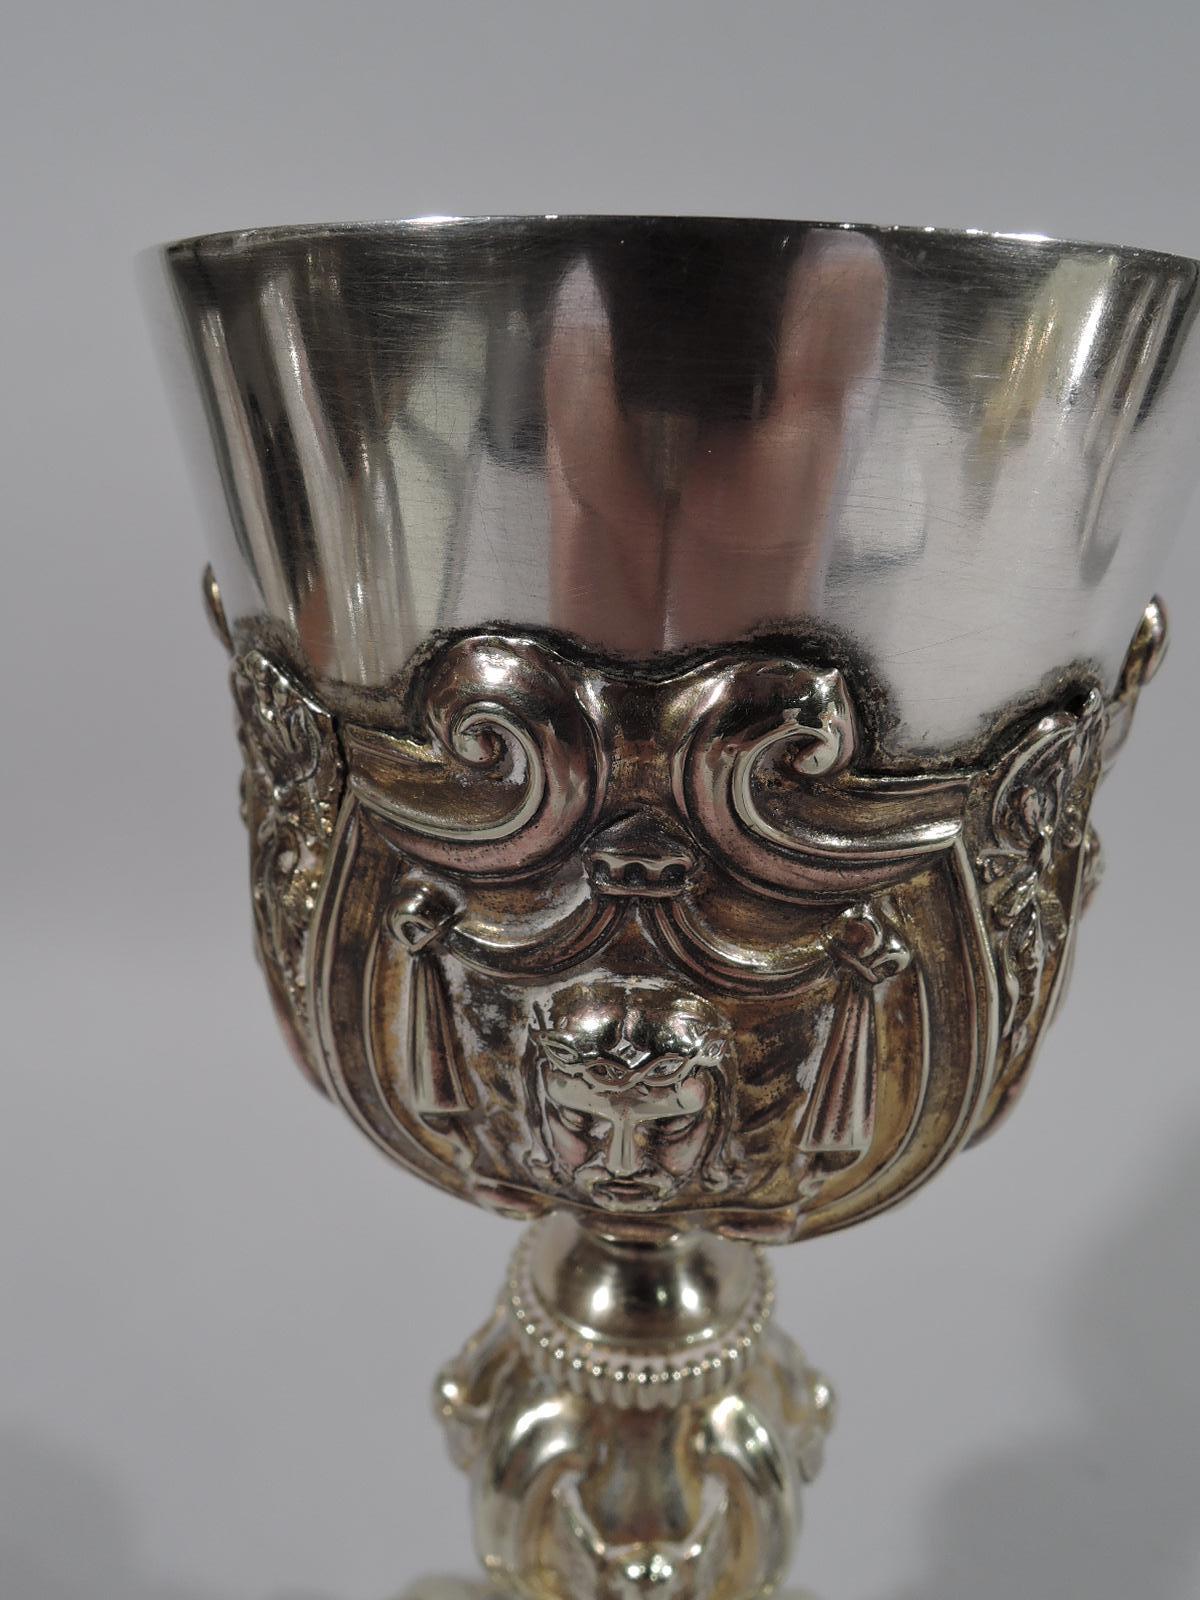 Antique European Renaissance Revival silver gilt chalice, circa 1850. Bowl on baluster shaft on shaped, domed, and stepped foot. Chased scrolls framing religious imagery. On bowl, the veil of Veronica interspersed with pendant branches. On foot, are